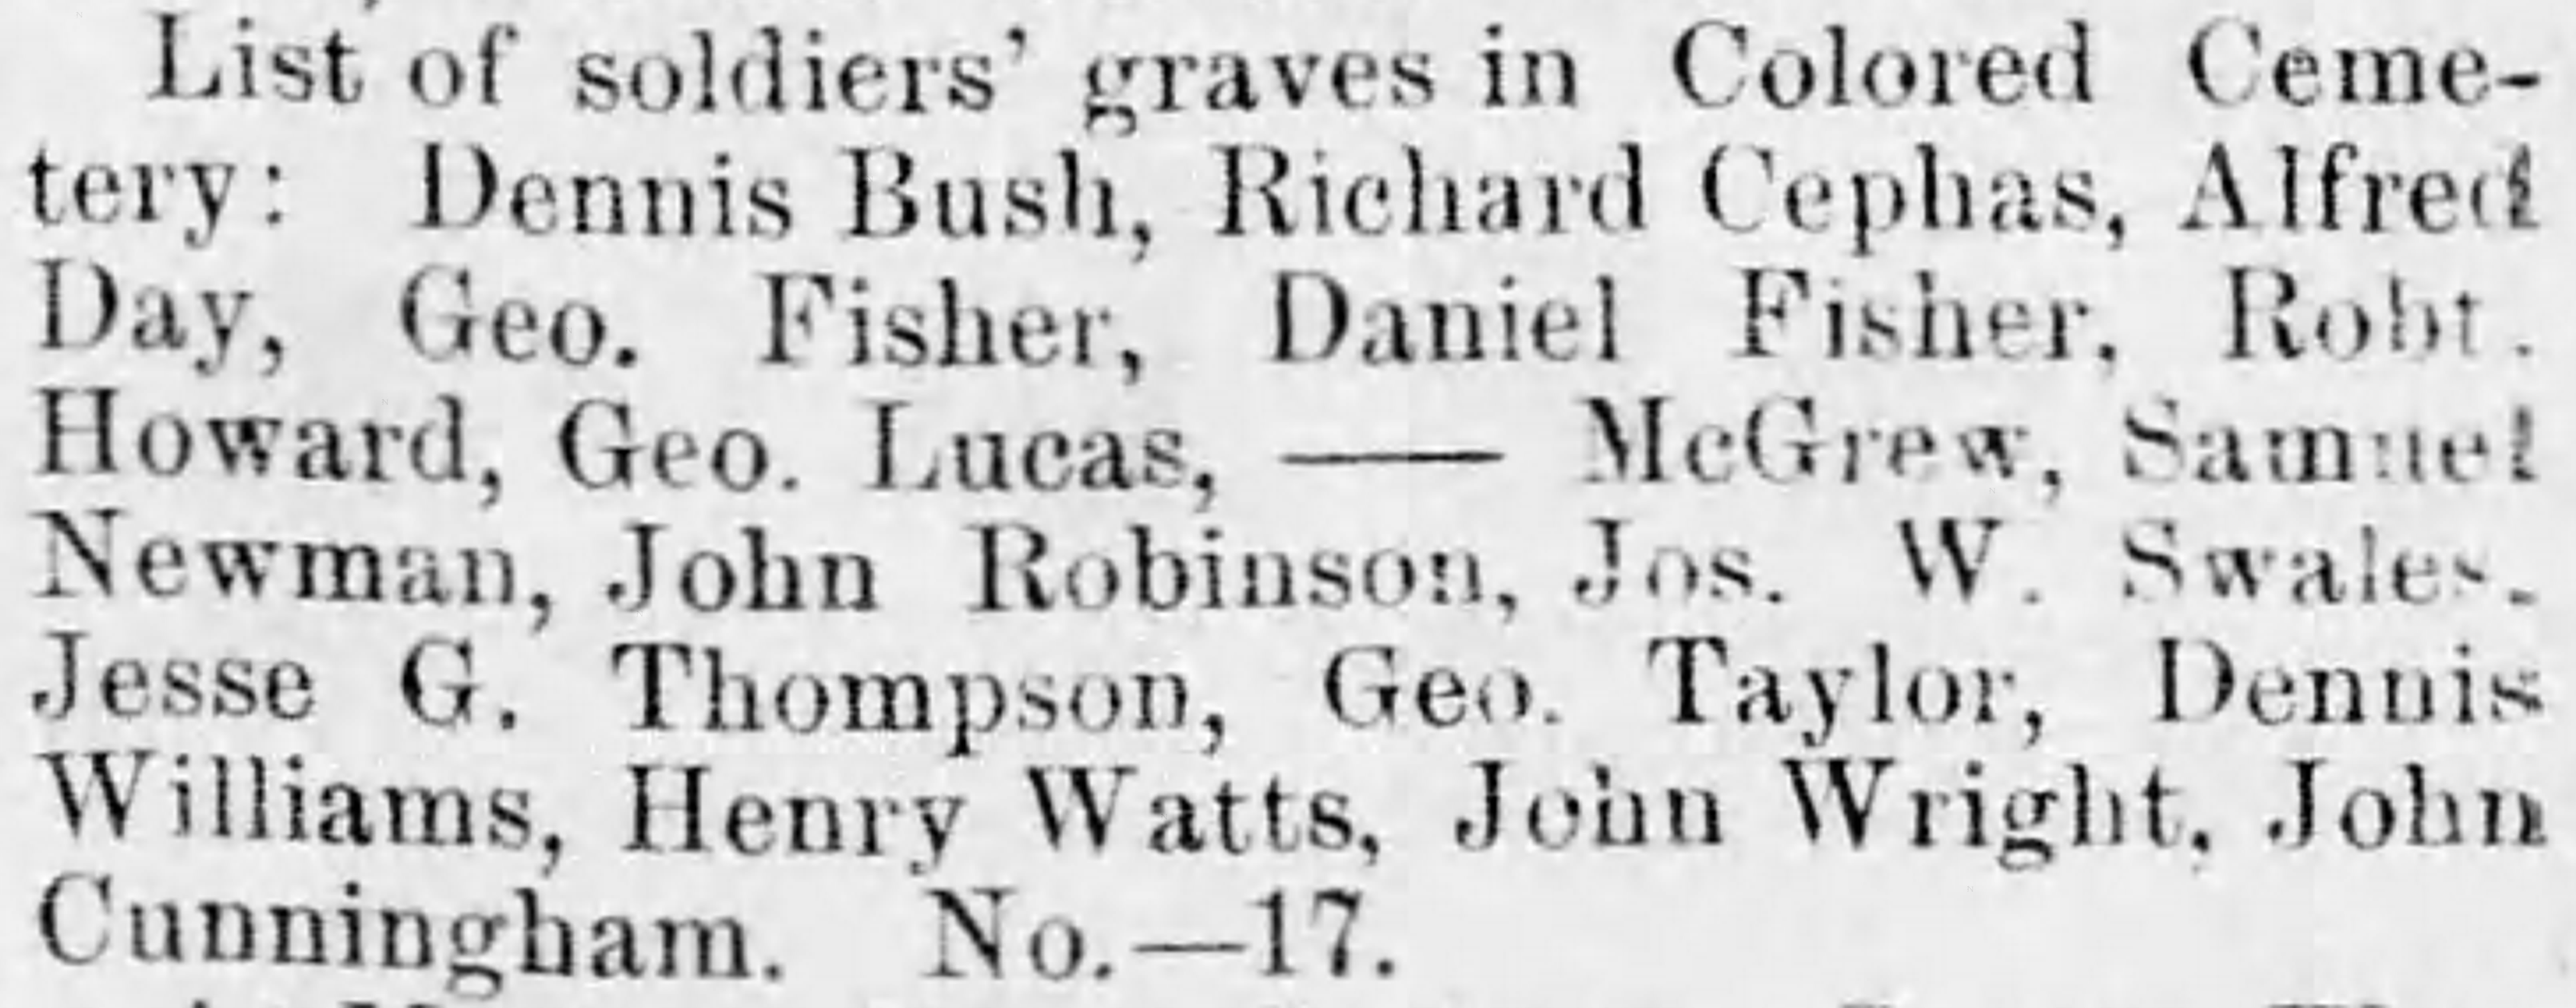 Newspaper article listing the graves of Civil War soldiers in Cumberland County